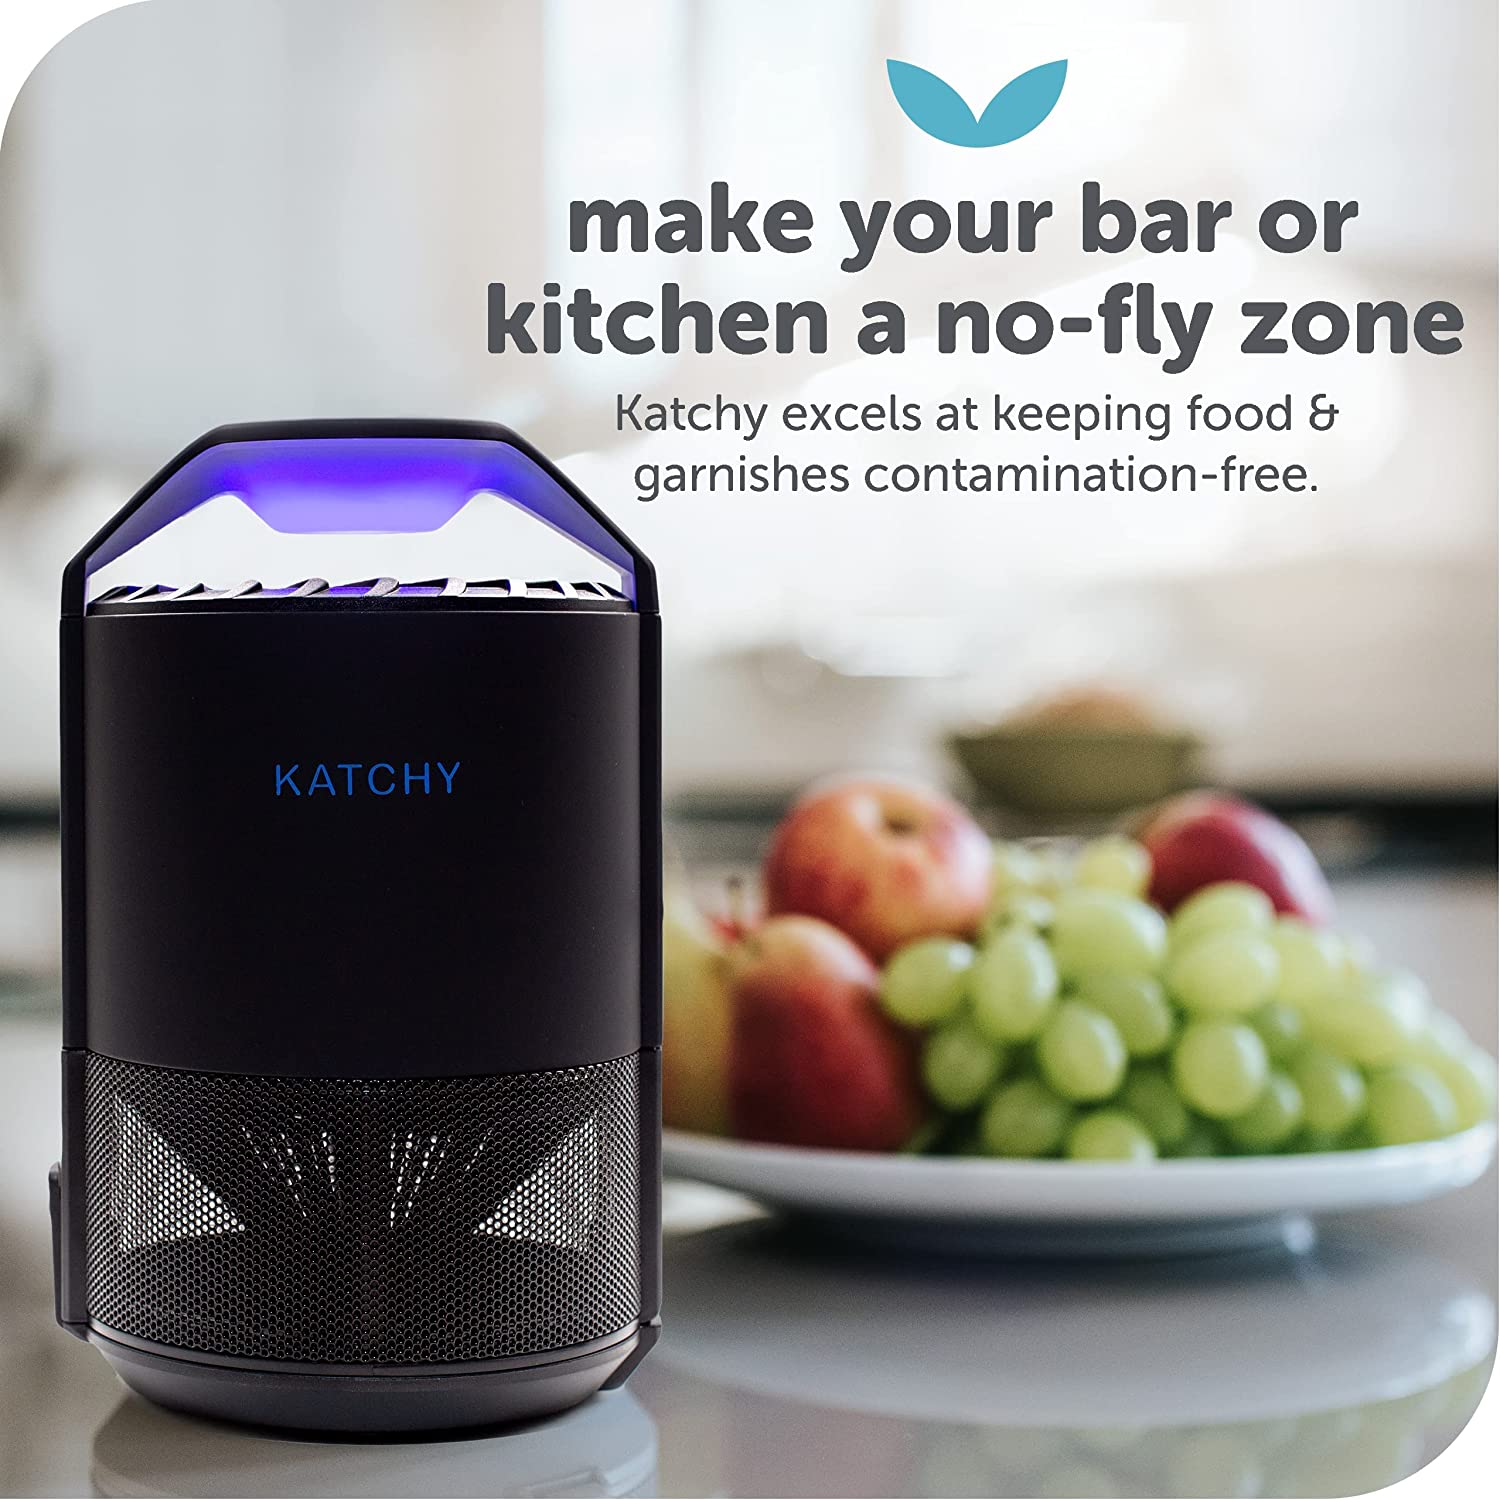 Katchy Indoor Insect Trap - Catcher & Killer for Mosquitoes, Gnats, Moths,  Fruit Flies - Non-Zapper Traps for Inside Your Home - Catch Insects Indoors  with Suction, Bug Light & Sticky Glue (